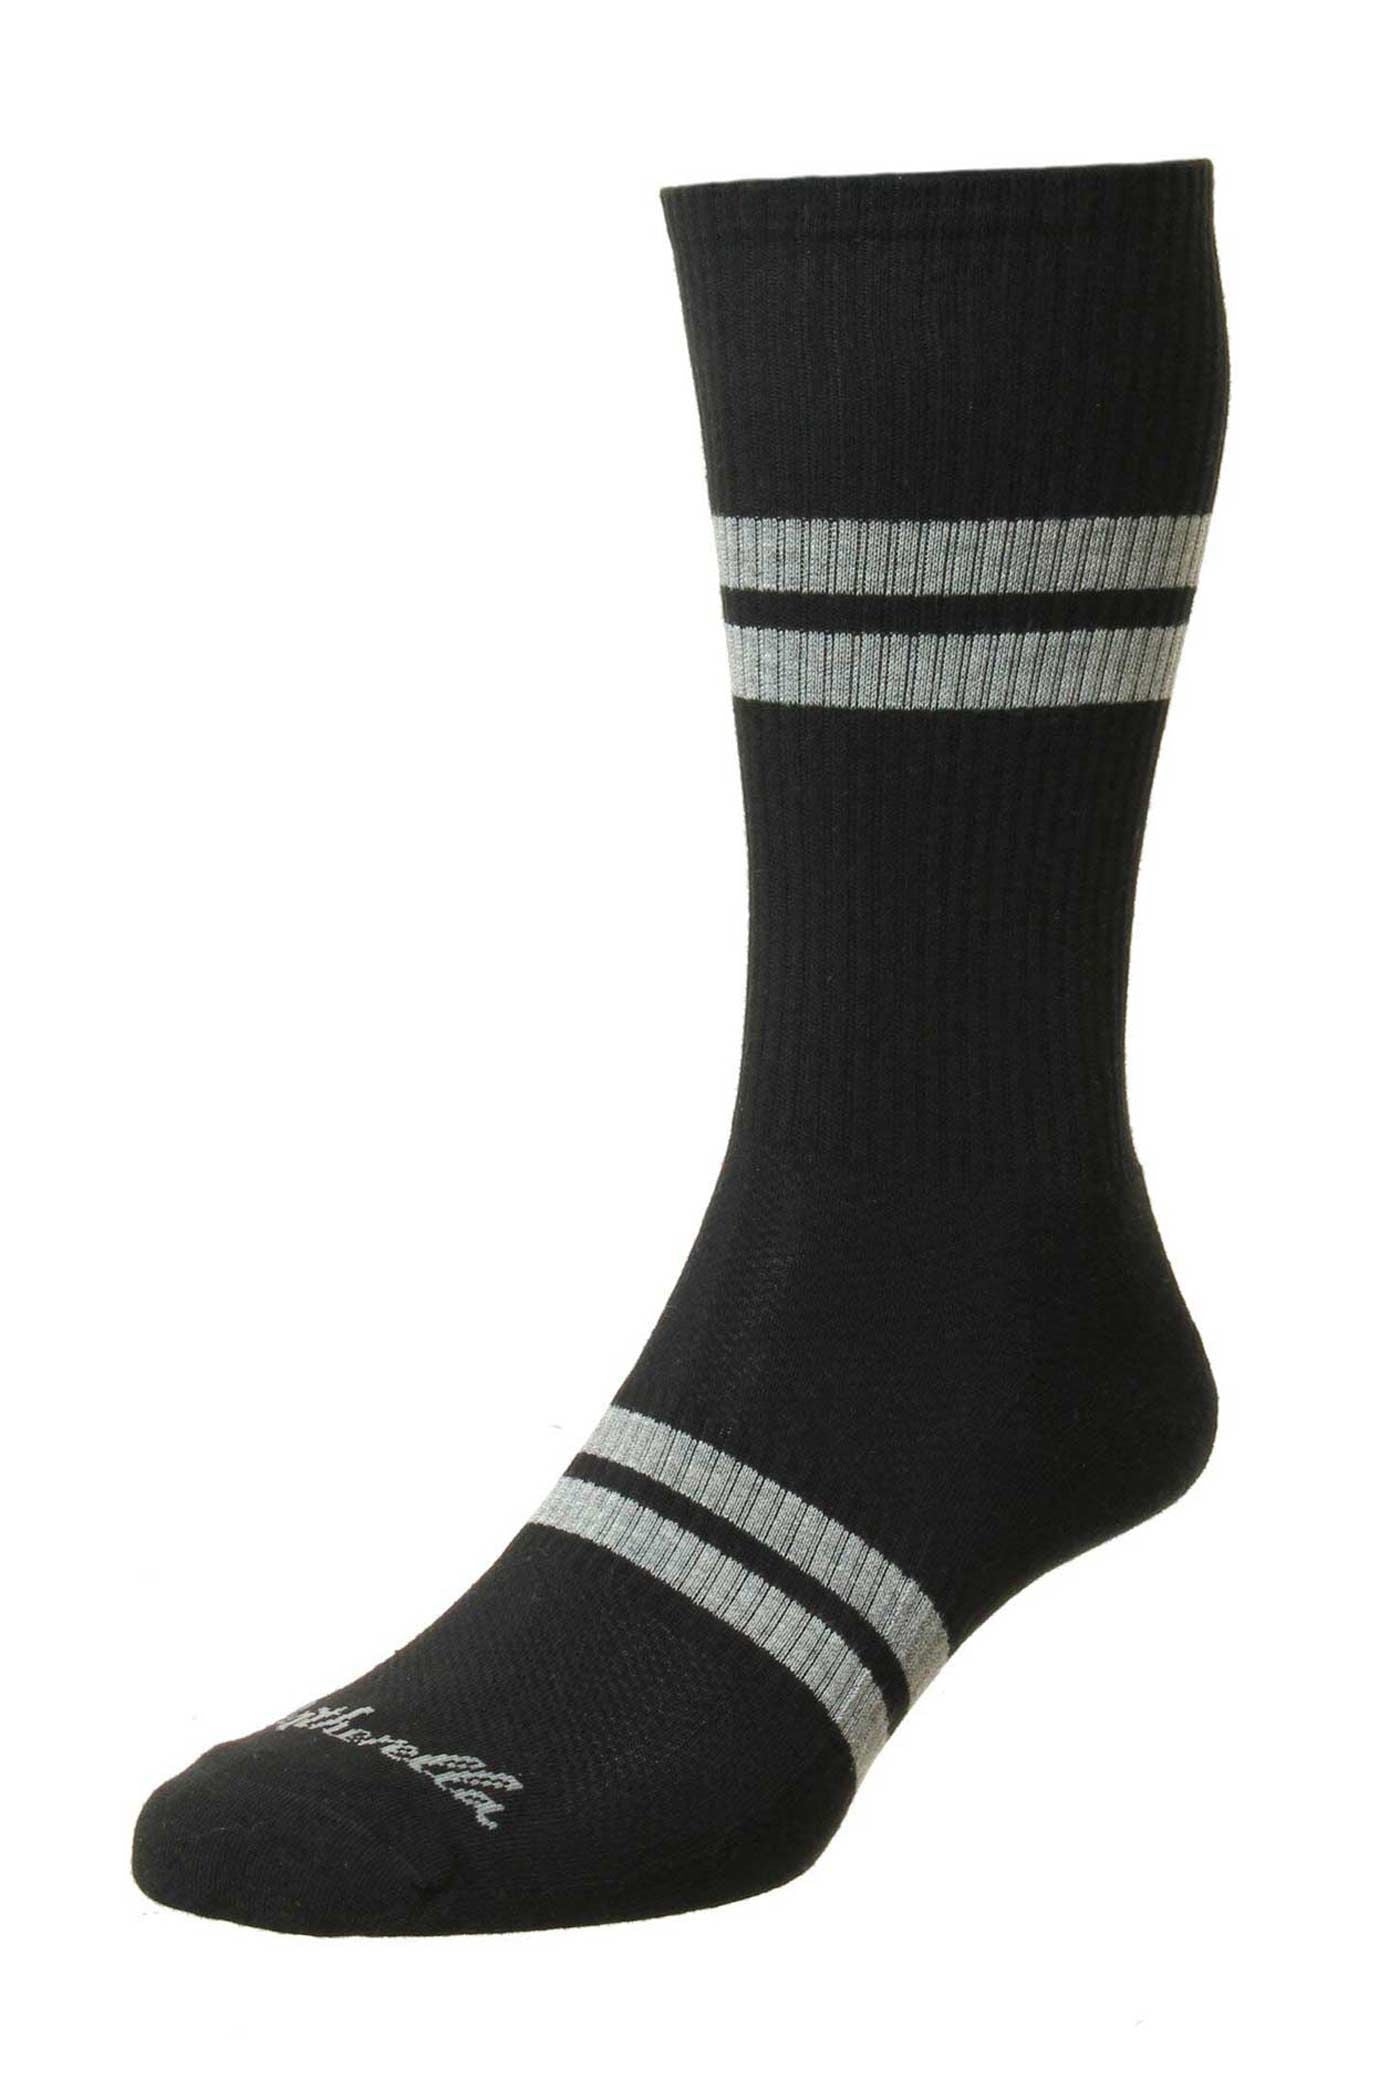 PANTHERELLA MEN'S SPORTS LUXE SOCKS WITH CUSHIONED SOLE - BLACK